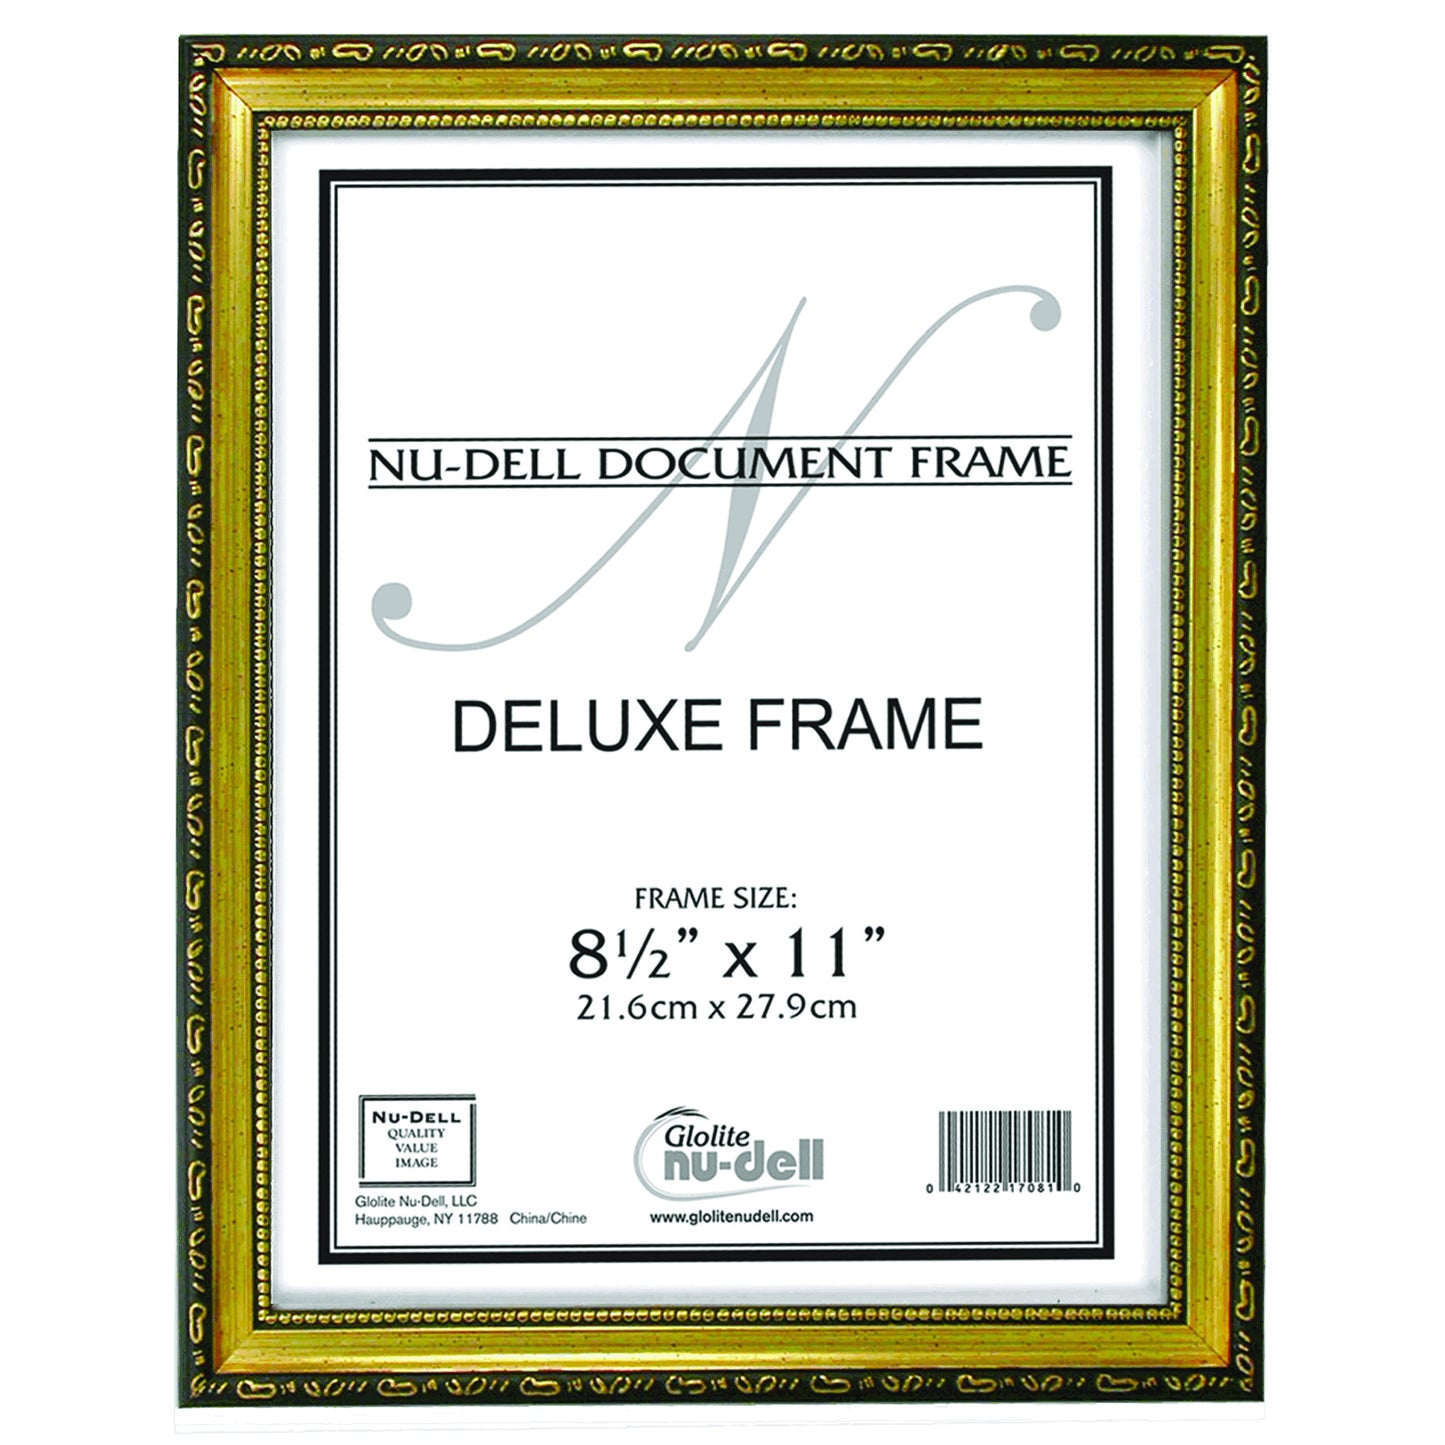 Deluxe Document Frame, 8.5" x 11, Gold